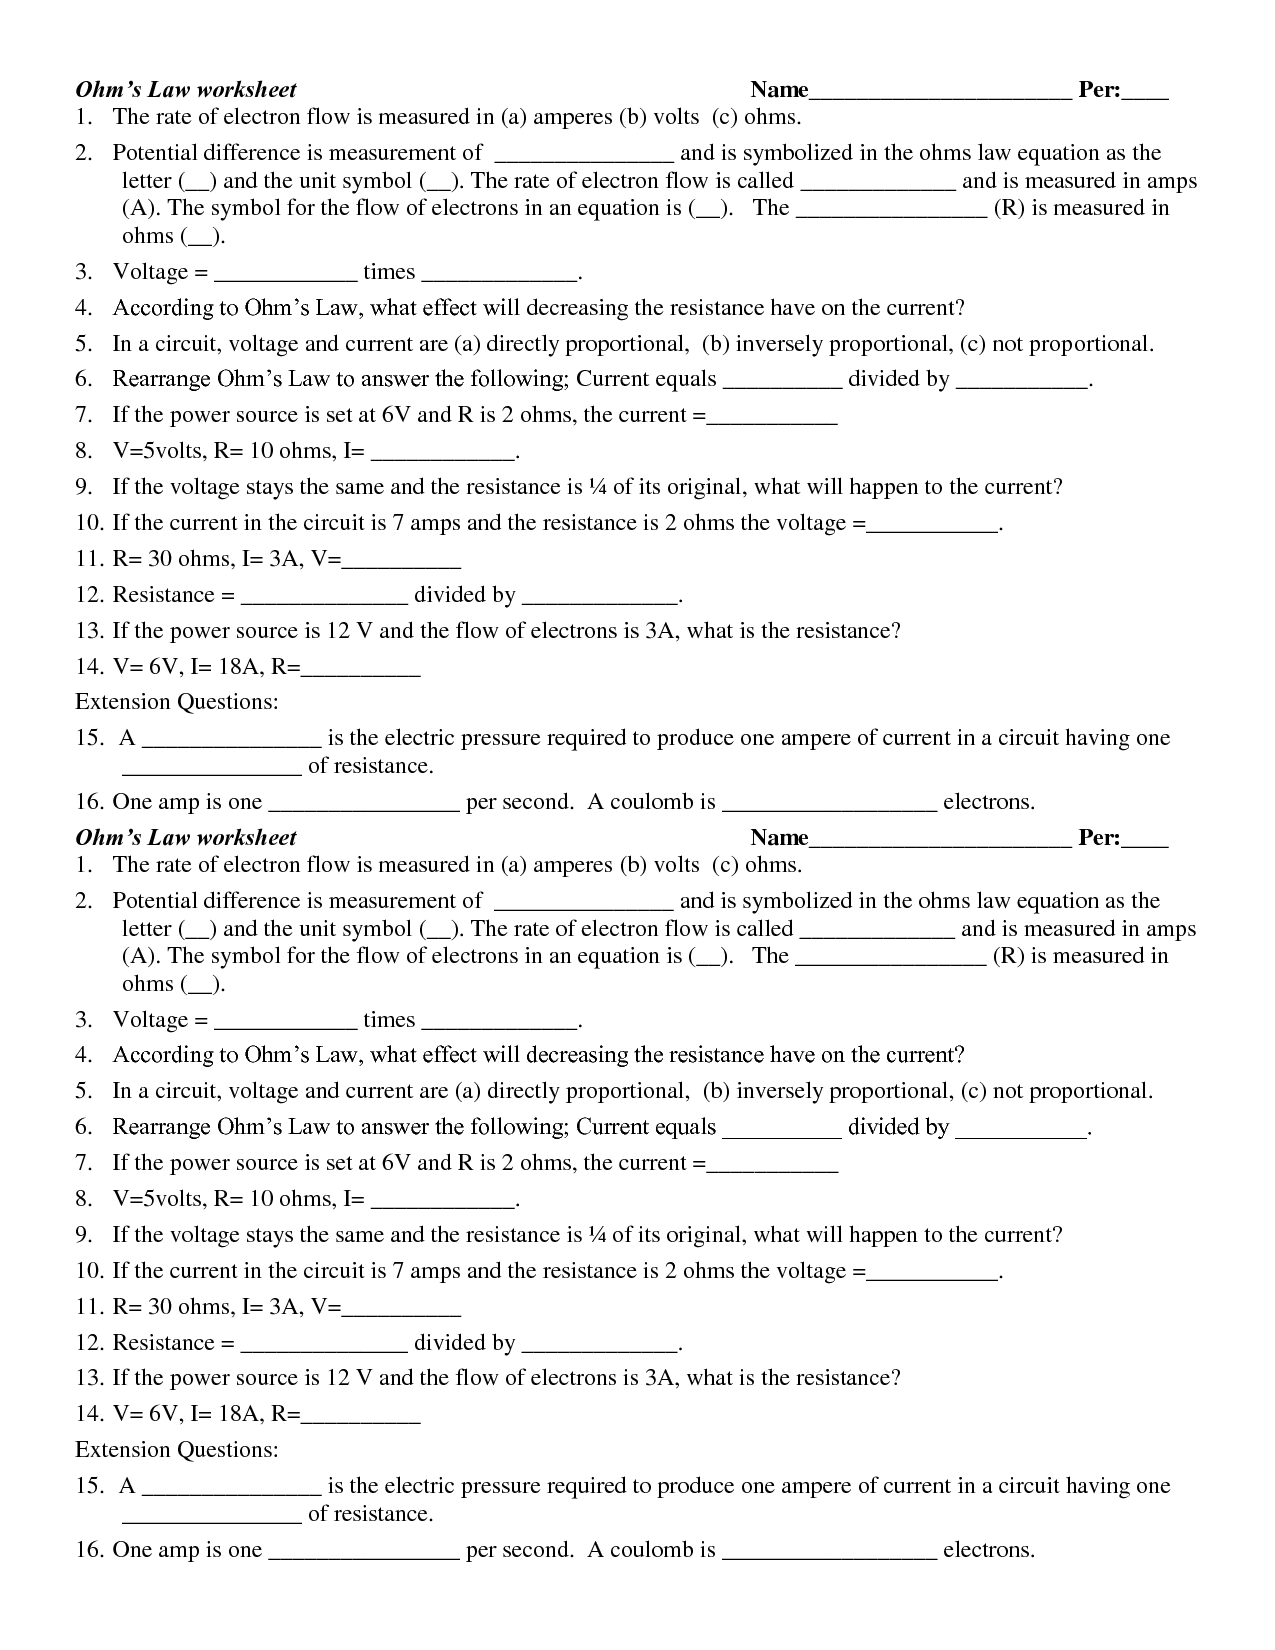 19 Best Images of Which Law Worksheet Answers  Gas Laws Worksheet Answer Key, Ohms Law 